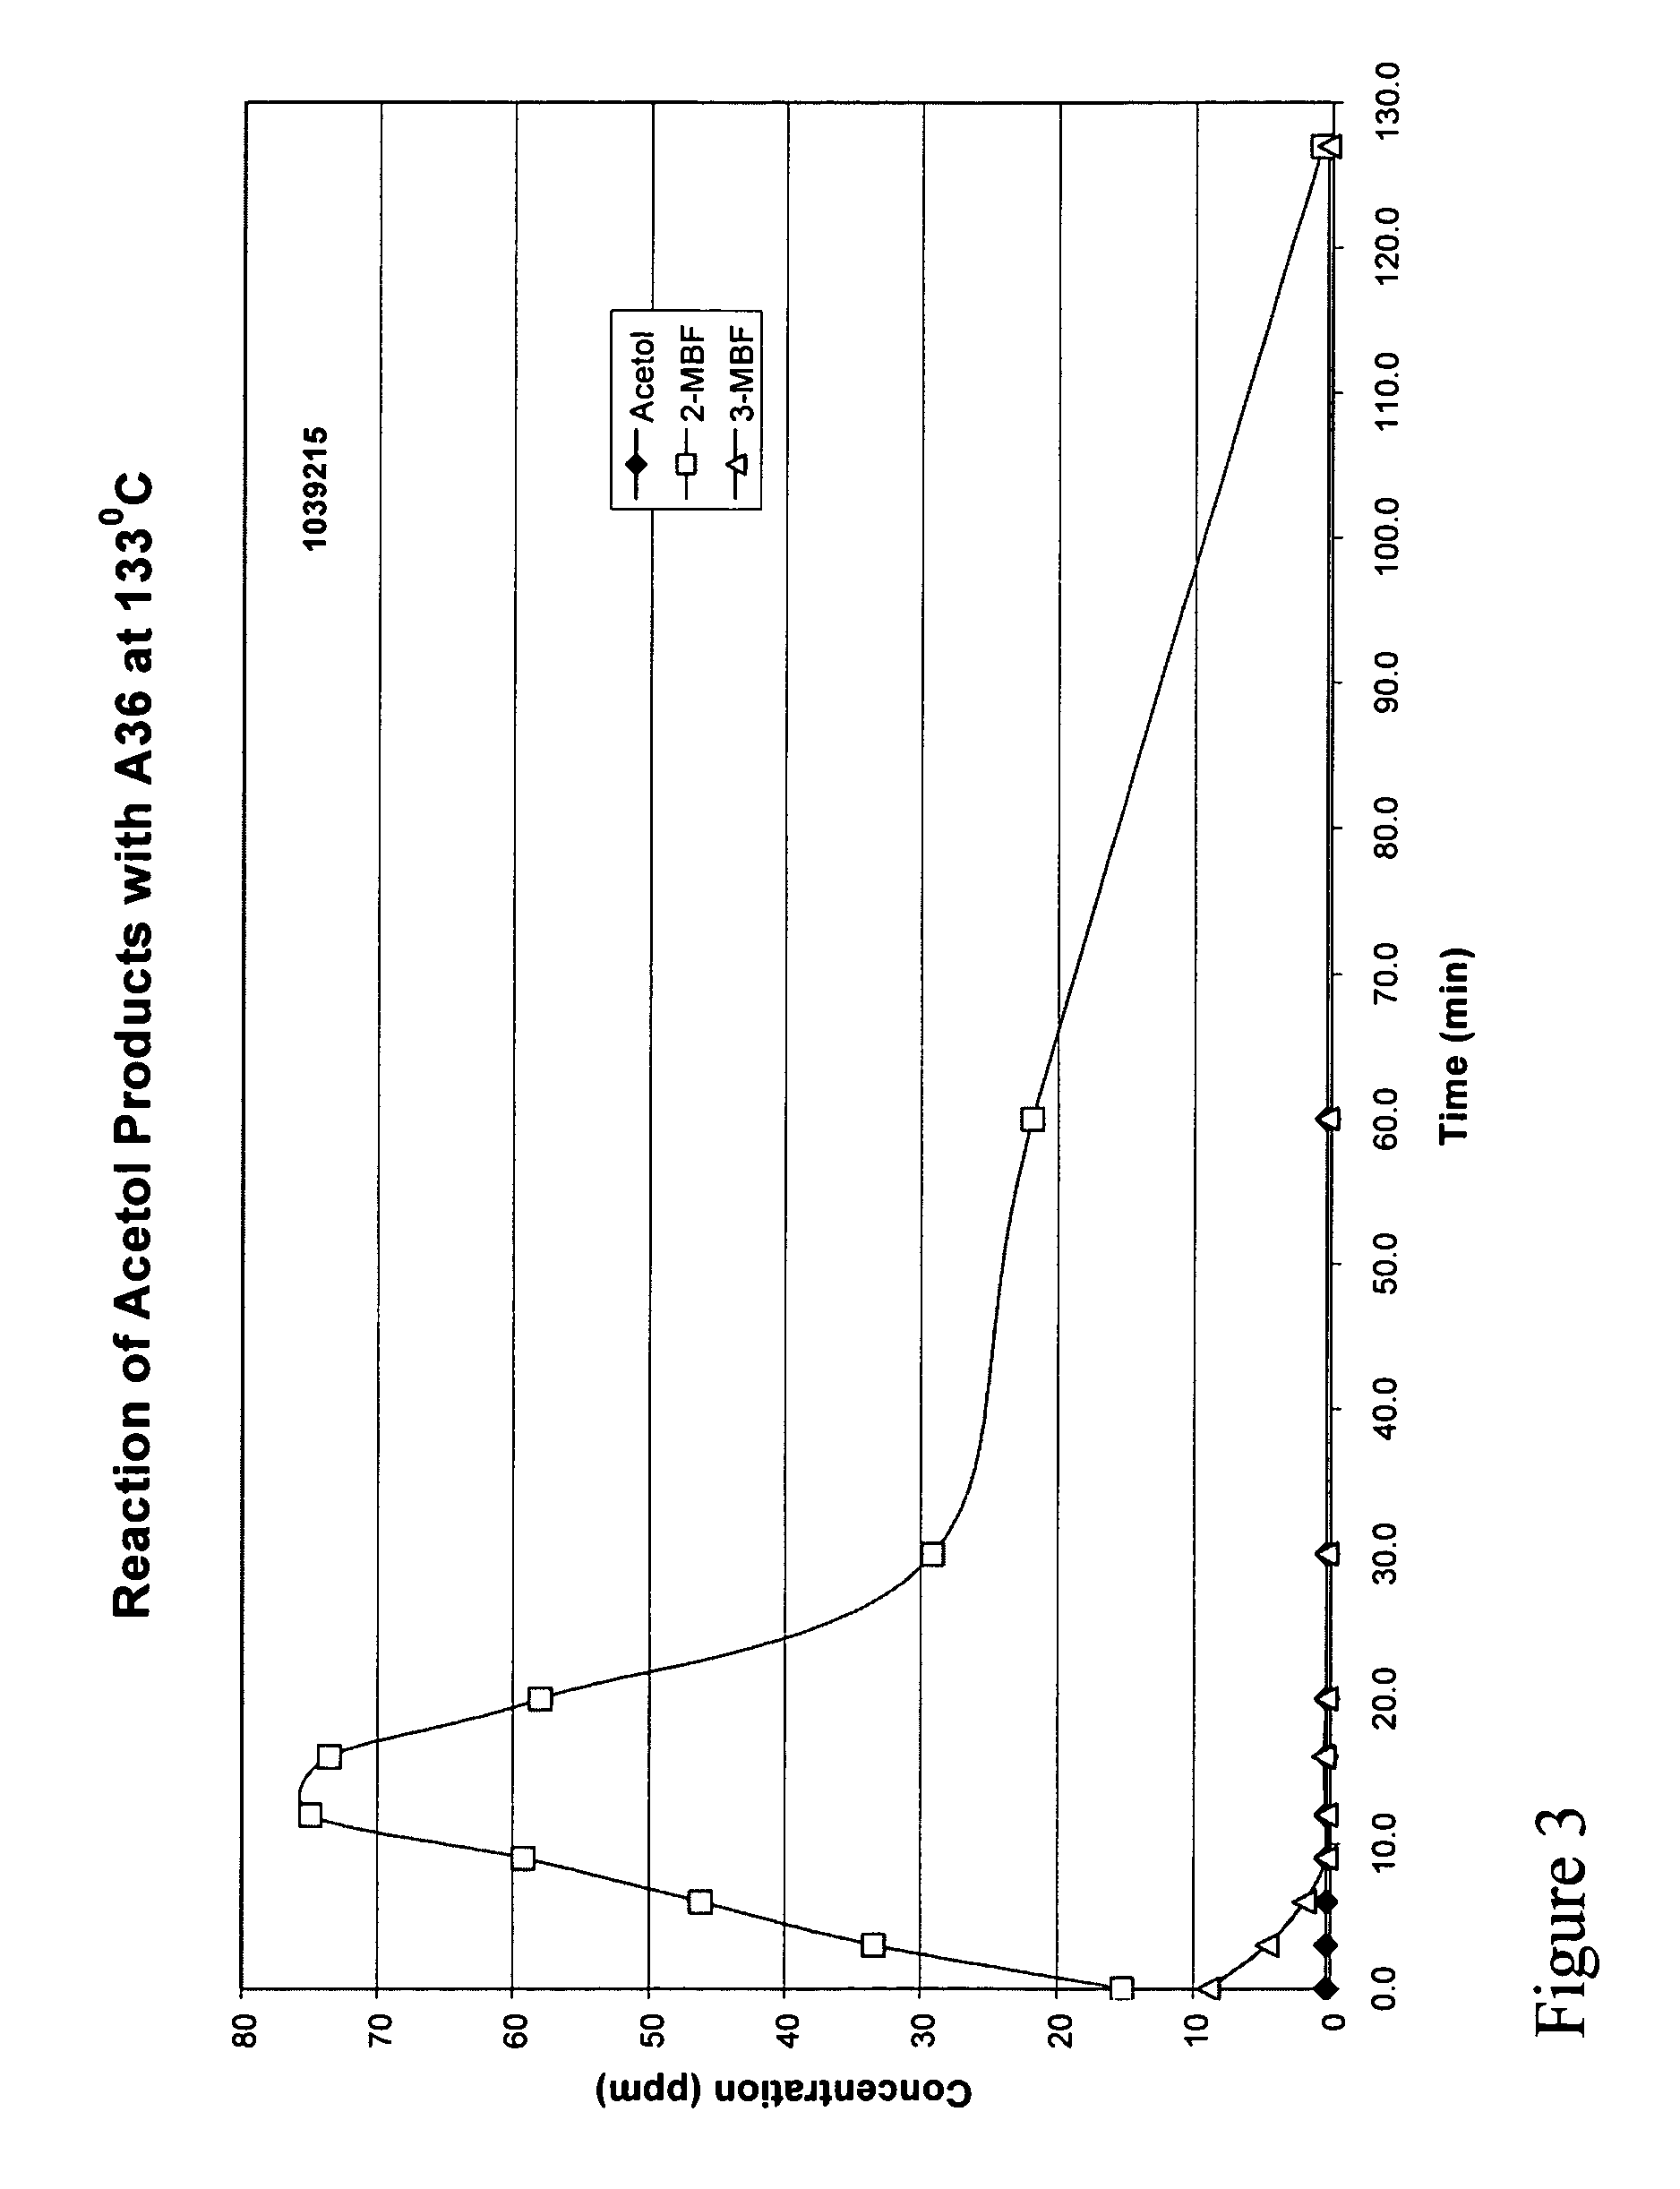 Method for removal of acetol from phenol